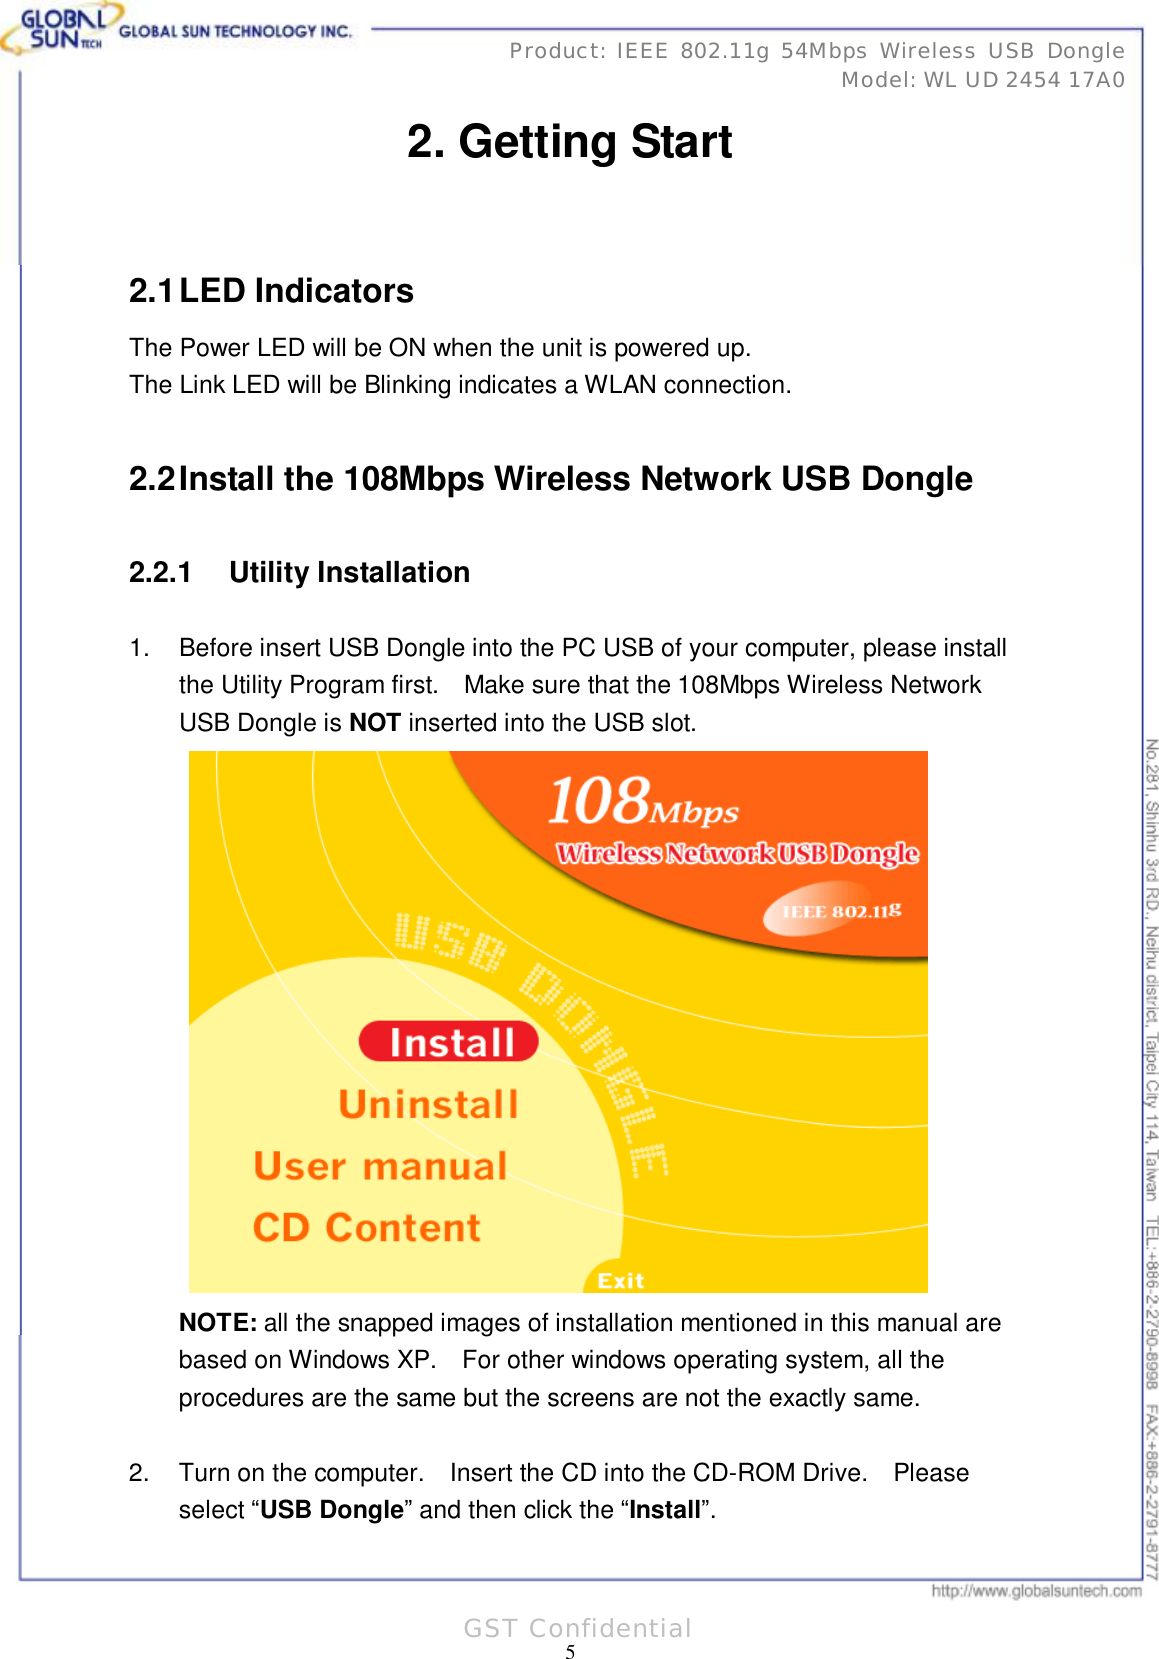      31 5 Product: IEEE 802.11g 54Mbps Wireless USB Dongle Model: WL UD 2454 17A0 GST Confidential 2. Getting Start  2.1 LED Indicators The Power LED will be ON when the unit is powered up. The Link LED will be Blinking indicates a WLAN connection.  2.2 Install the 108Mbps Wireless Network USB Dongle 2.2.1 Utility Installation 1. Before insert USB Dongle into the PC USB of your computer, please install the Utility Program first.  Make sure that the 108Mbps Wireless Network USB Dongle is NOT inserted into the USB slot.   NOTE: all the snapped images of installation mentioned in this manual are based on Windows XP.  For other windows operating system, all the procedures are the same but the screens are not the exactly same.  2. Turn on the computer.  Insert the CD into the CD-ROM Drive.  Please select “USB Dongle” and then click the “Install”. 